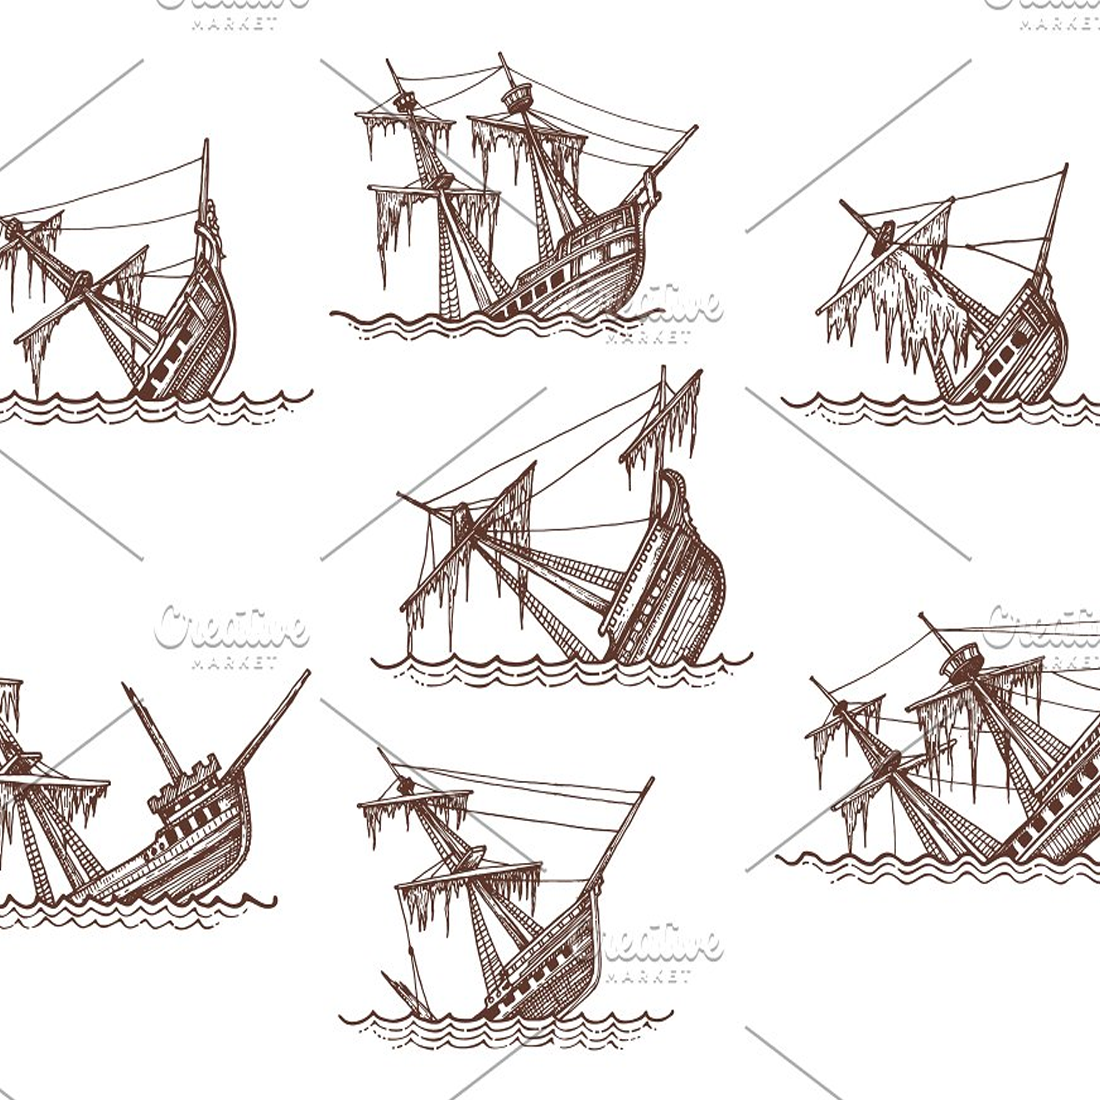 Images preview sunken sailing ship sketches.